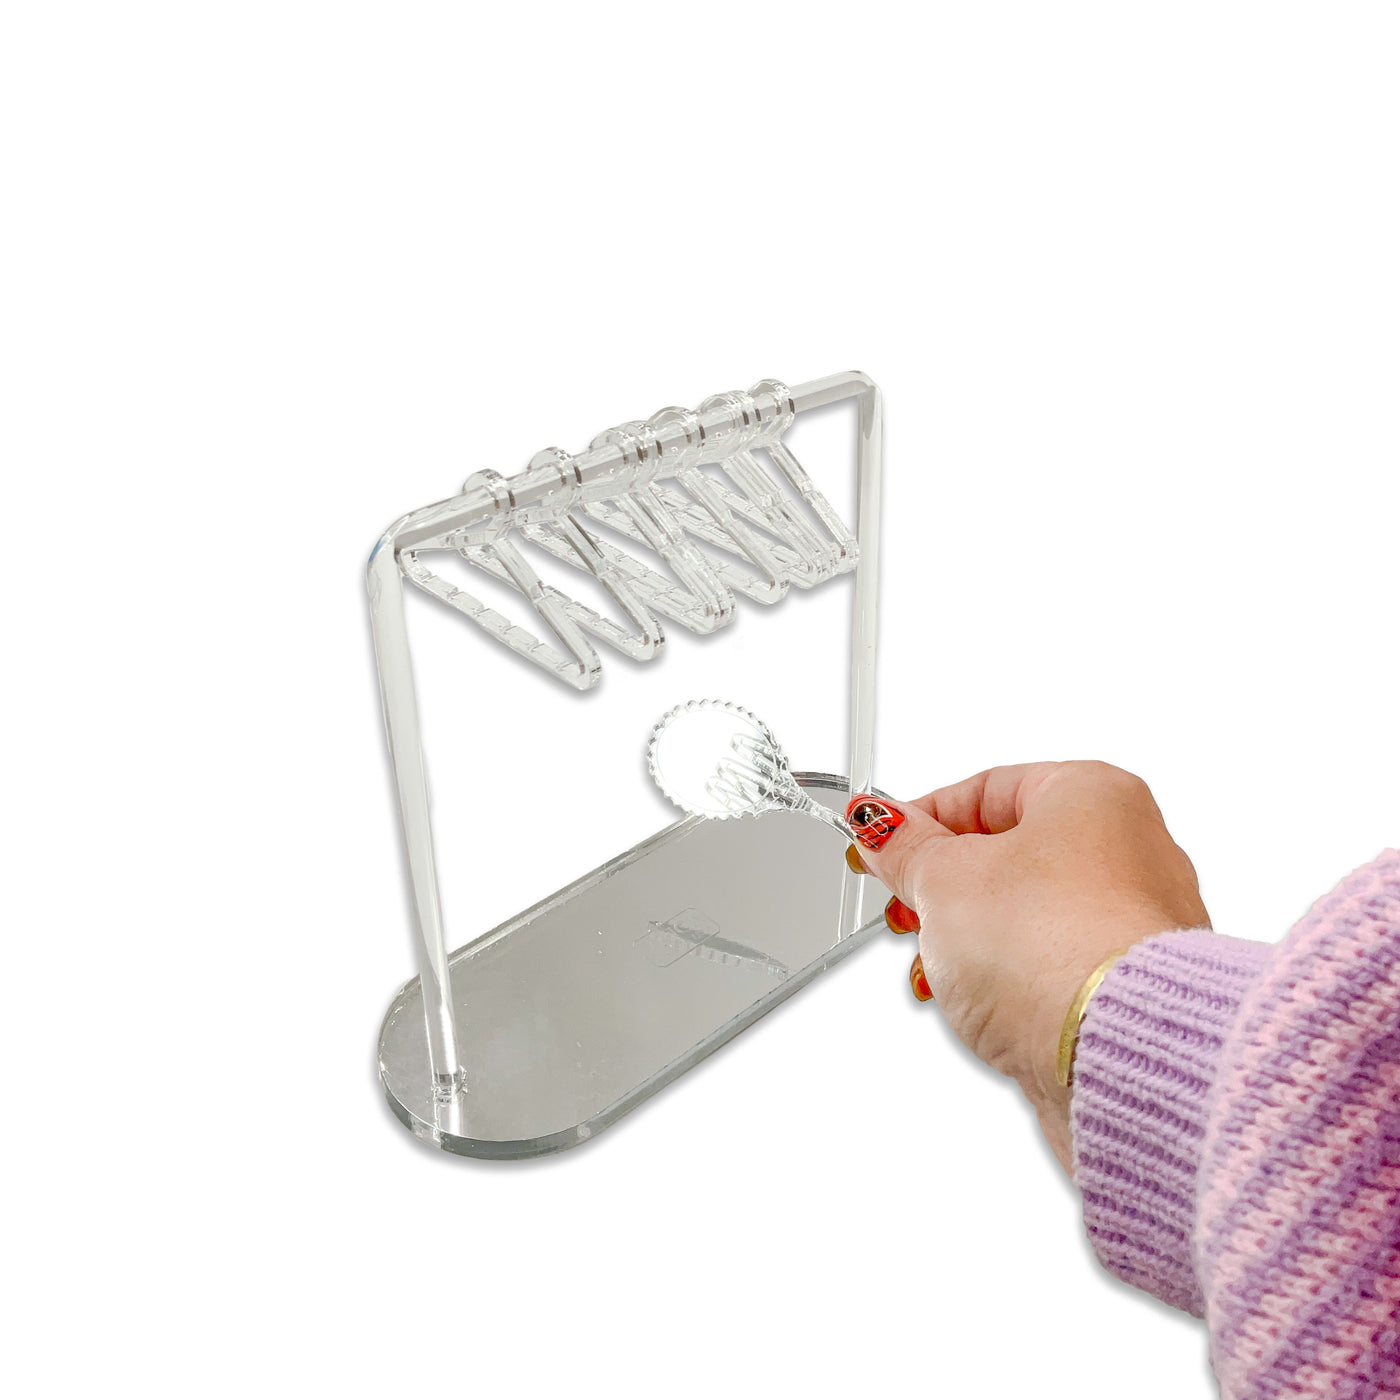 Hang in There! Adorable Dresser-Top Earring Organizer - Common Coat Hanger Style